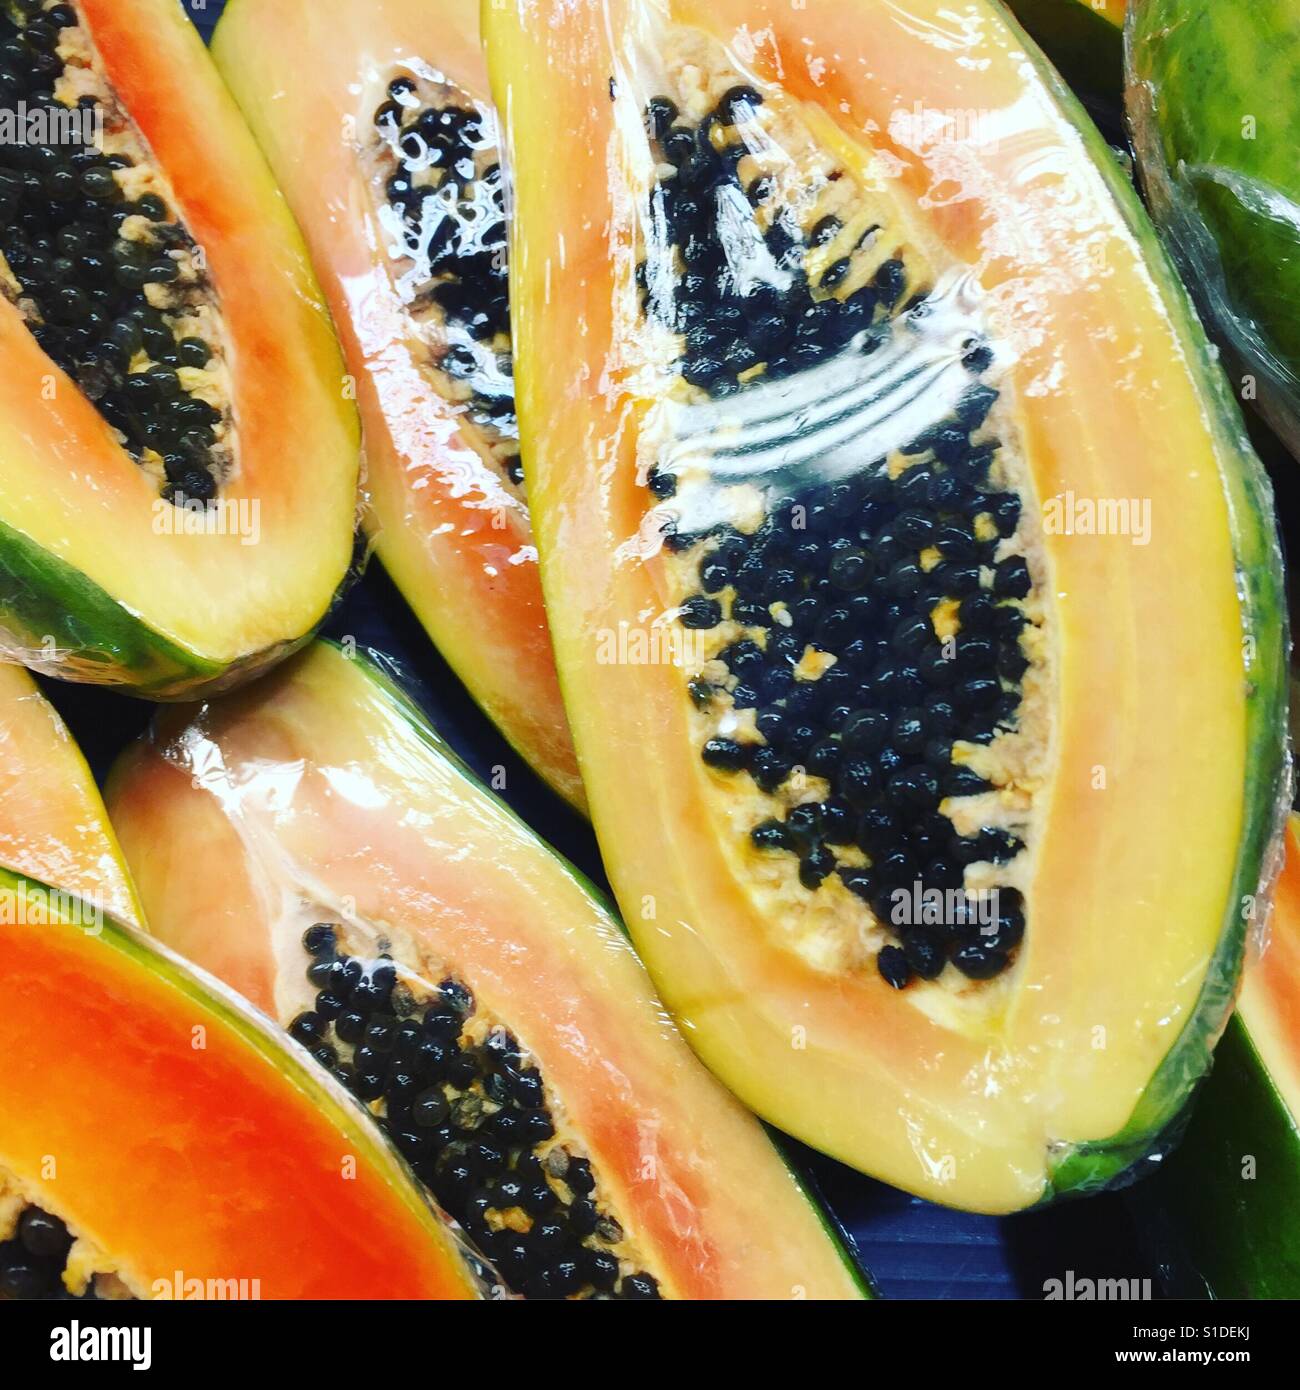 Papayas for sales by K.R. Stock Photo